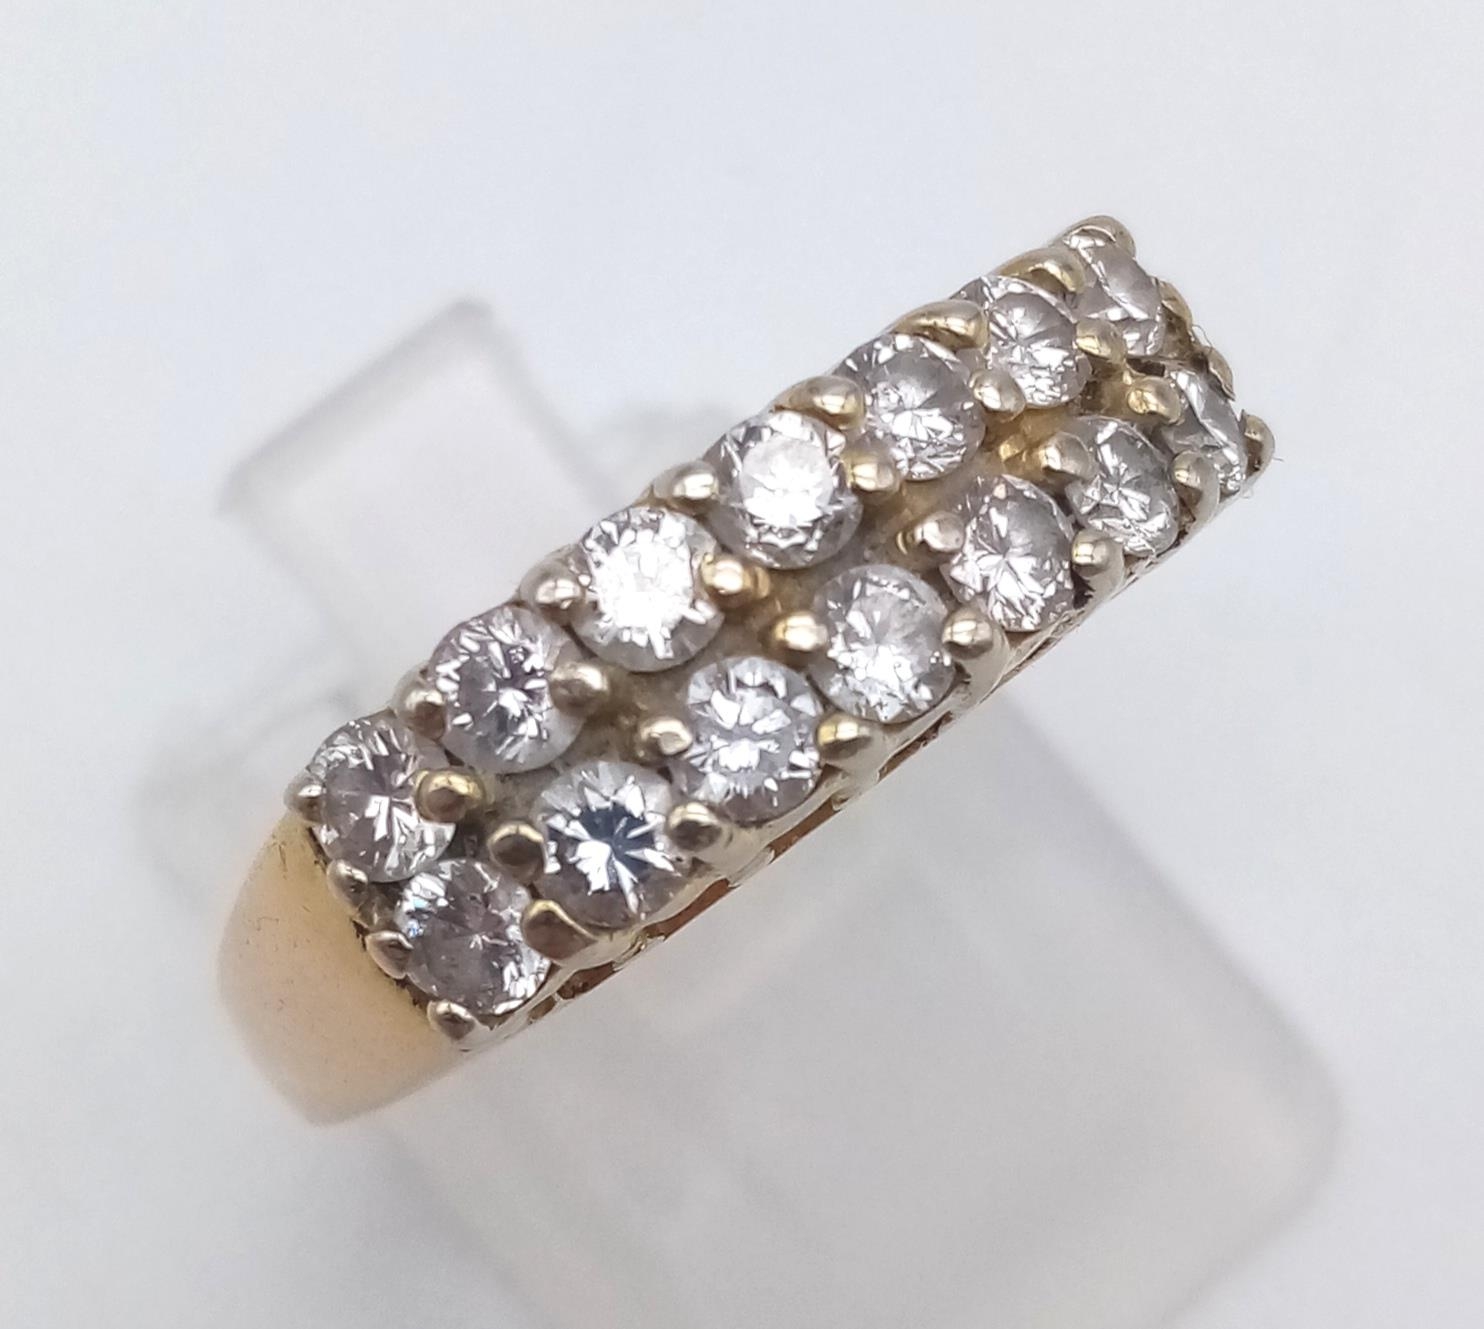 A 14 K yellow gold ring with two rows of diamonds (0.6 carats). Ring size: N, weight: 5.2 g.